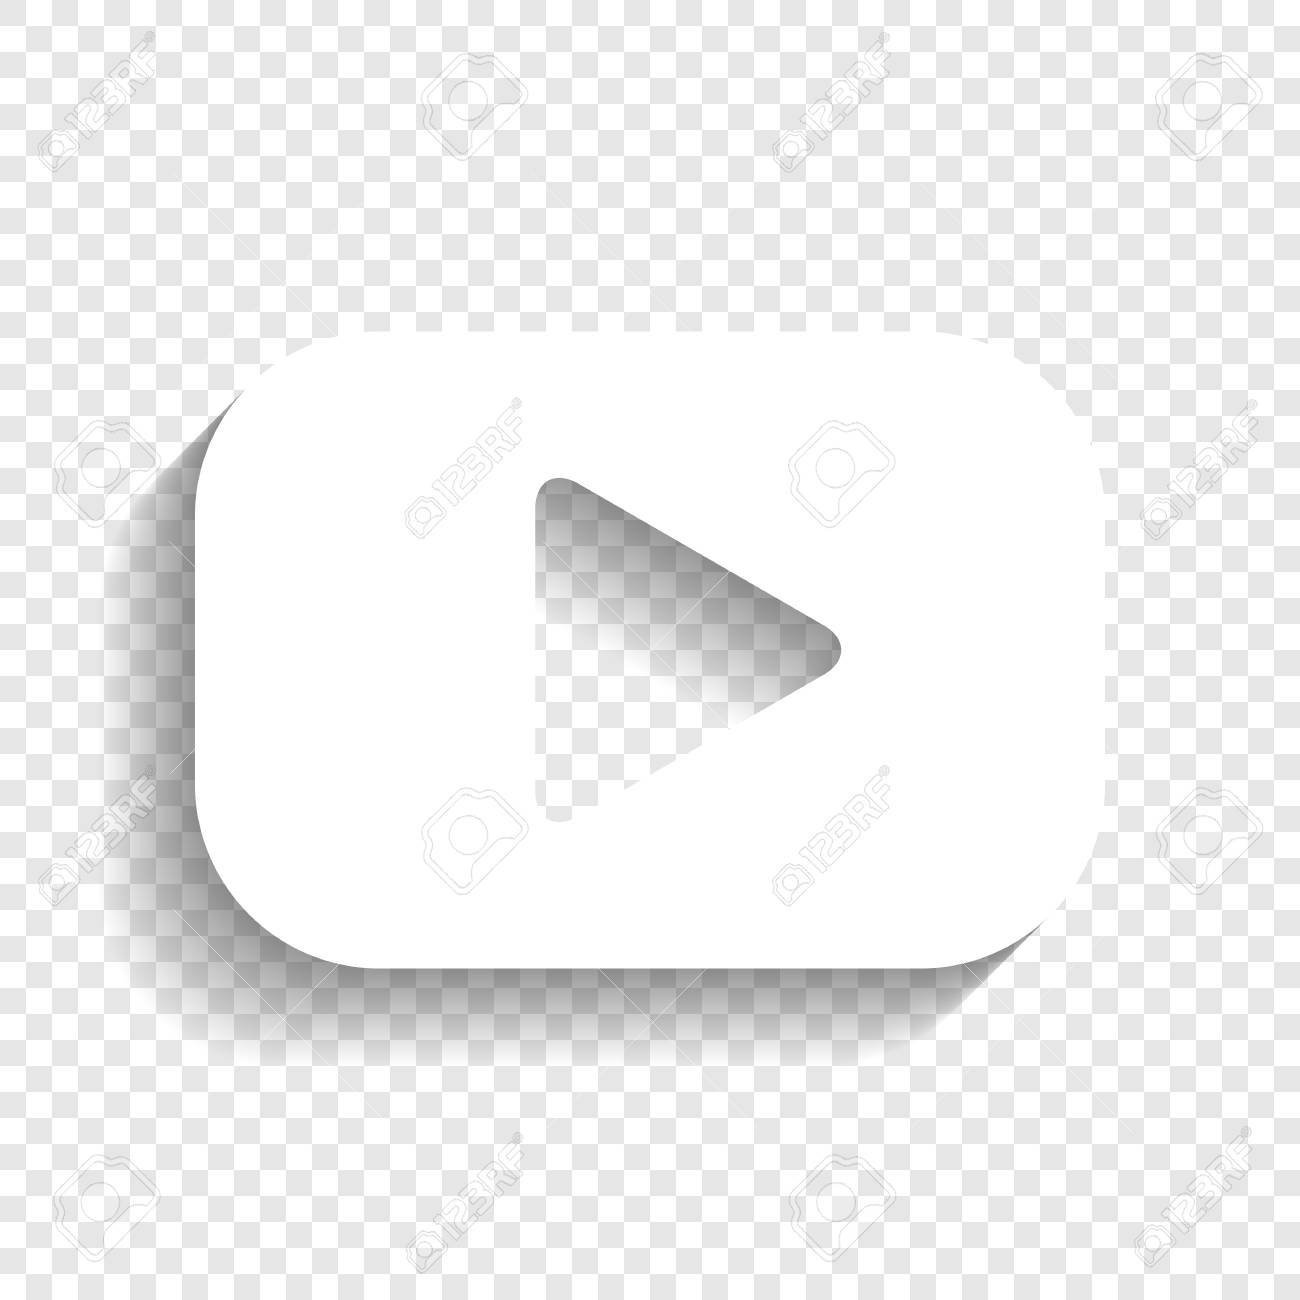 Play Button Icon Isolated On Transparent Stock Vector 654732316 